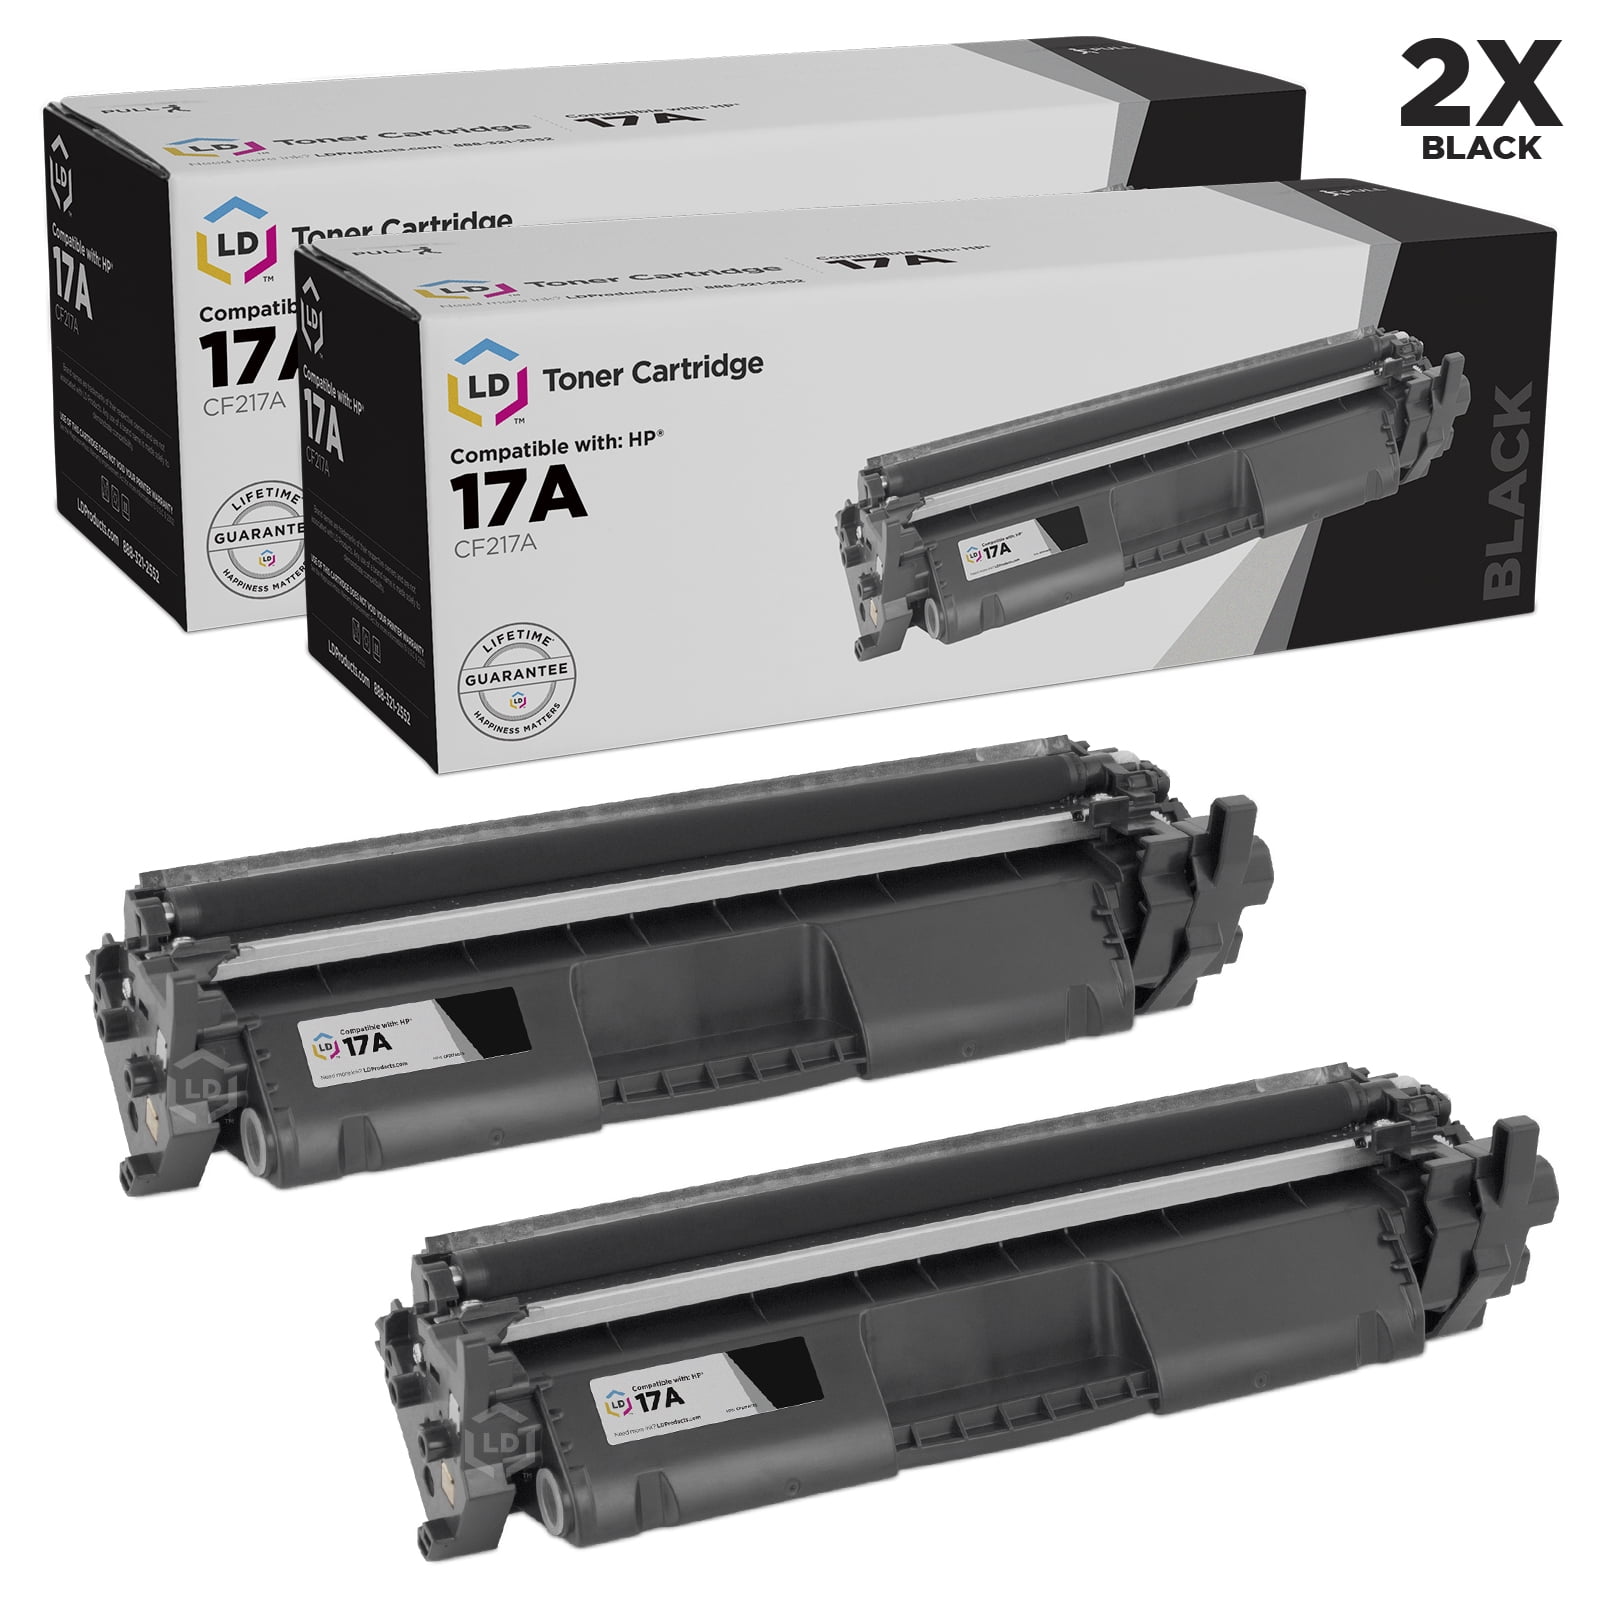 ,M130fn G3Q57A CF219A Drum Unit 1 Pack for HP Laserjet Pro MFP M130a Compatible Replacement for HP 17A Printers. G3Q59A ,M130fw CF217A Toner Cartridge 1 Pack and 19A G3Q34A ,M102a G3Q60A 